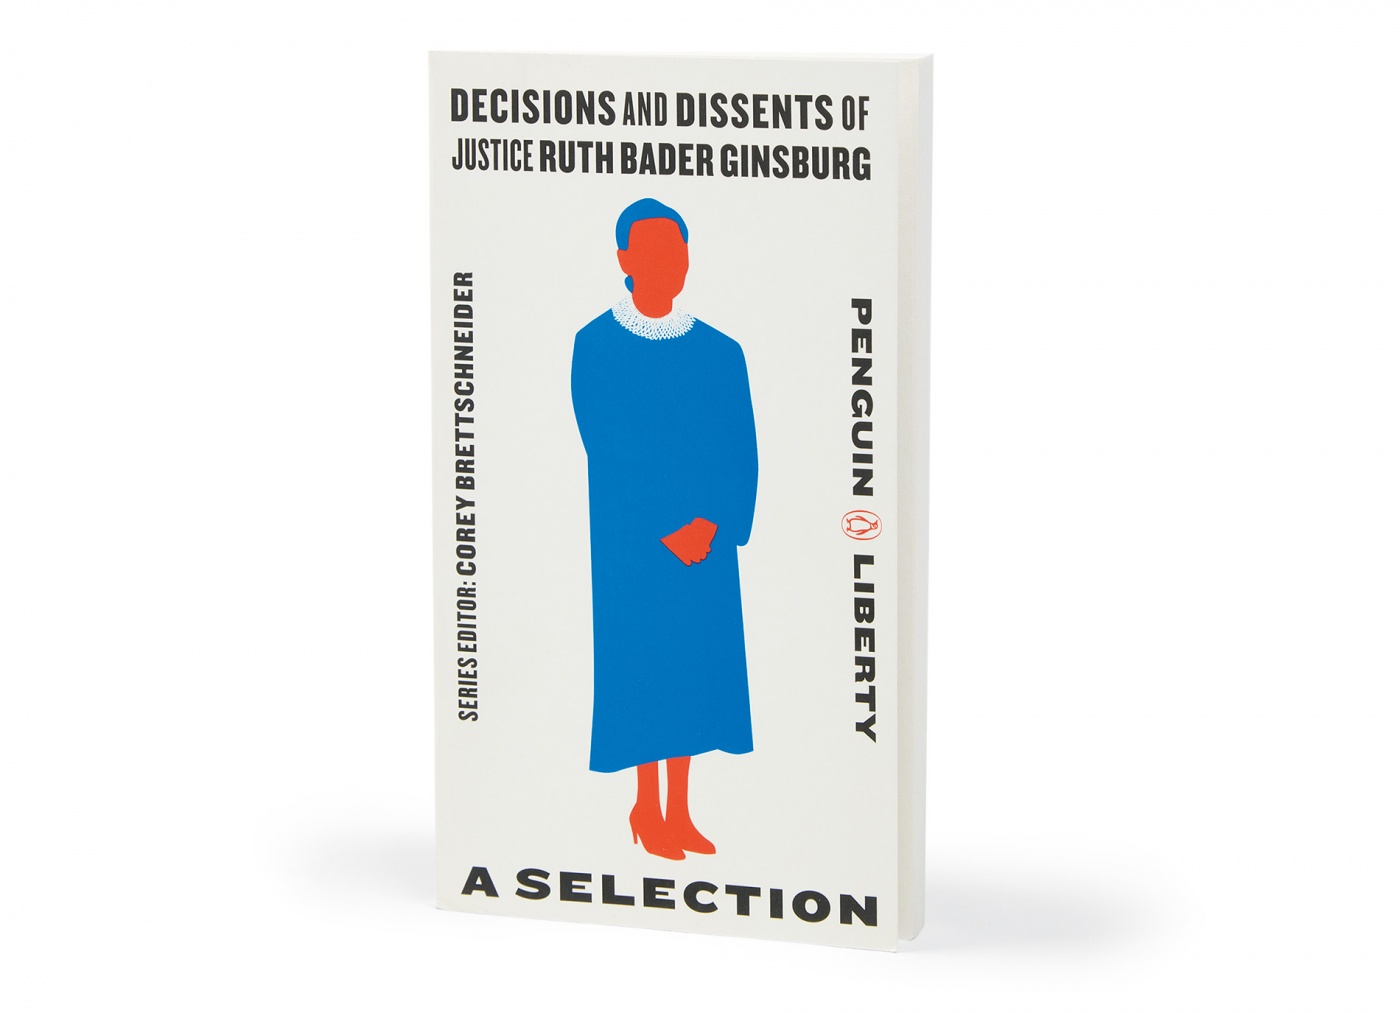 Image of book Decisions and Dissents of Ruth Bader Ginsburg: A Selection